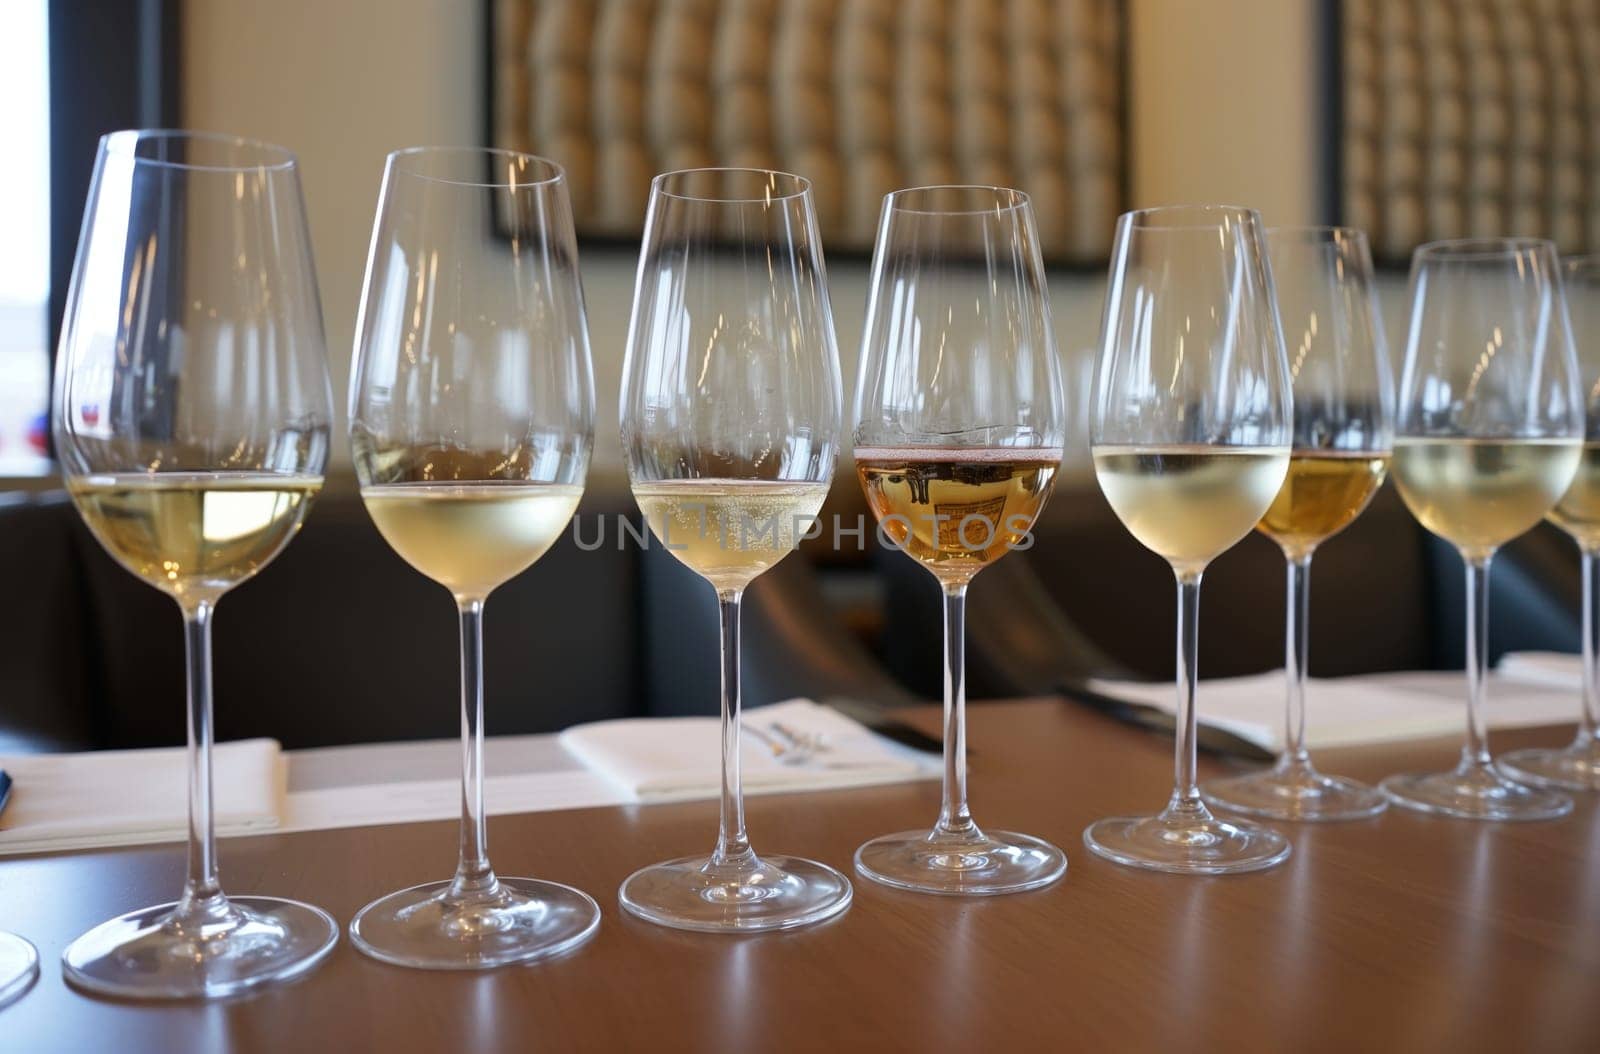 A set of glasses with different shades of white wine are neatly arranged on a polished wooden table for wine tasting